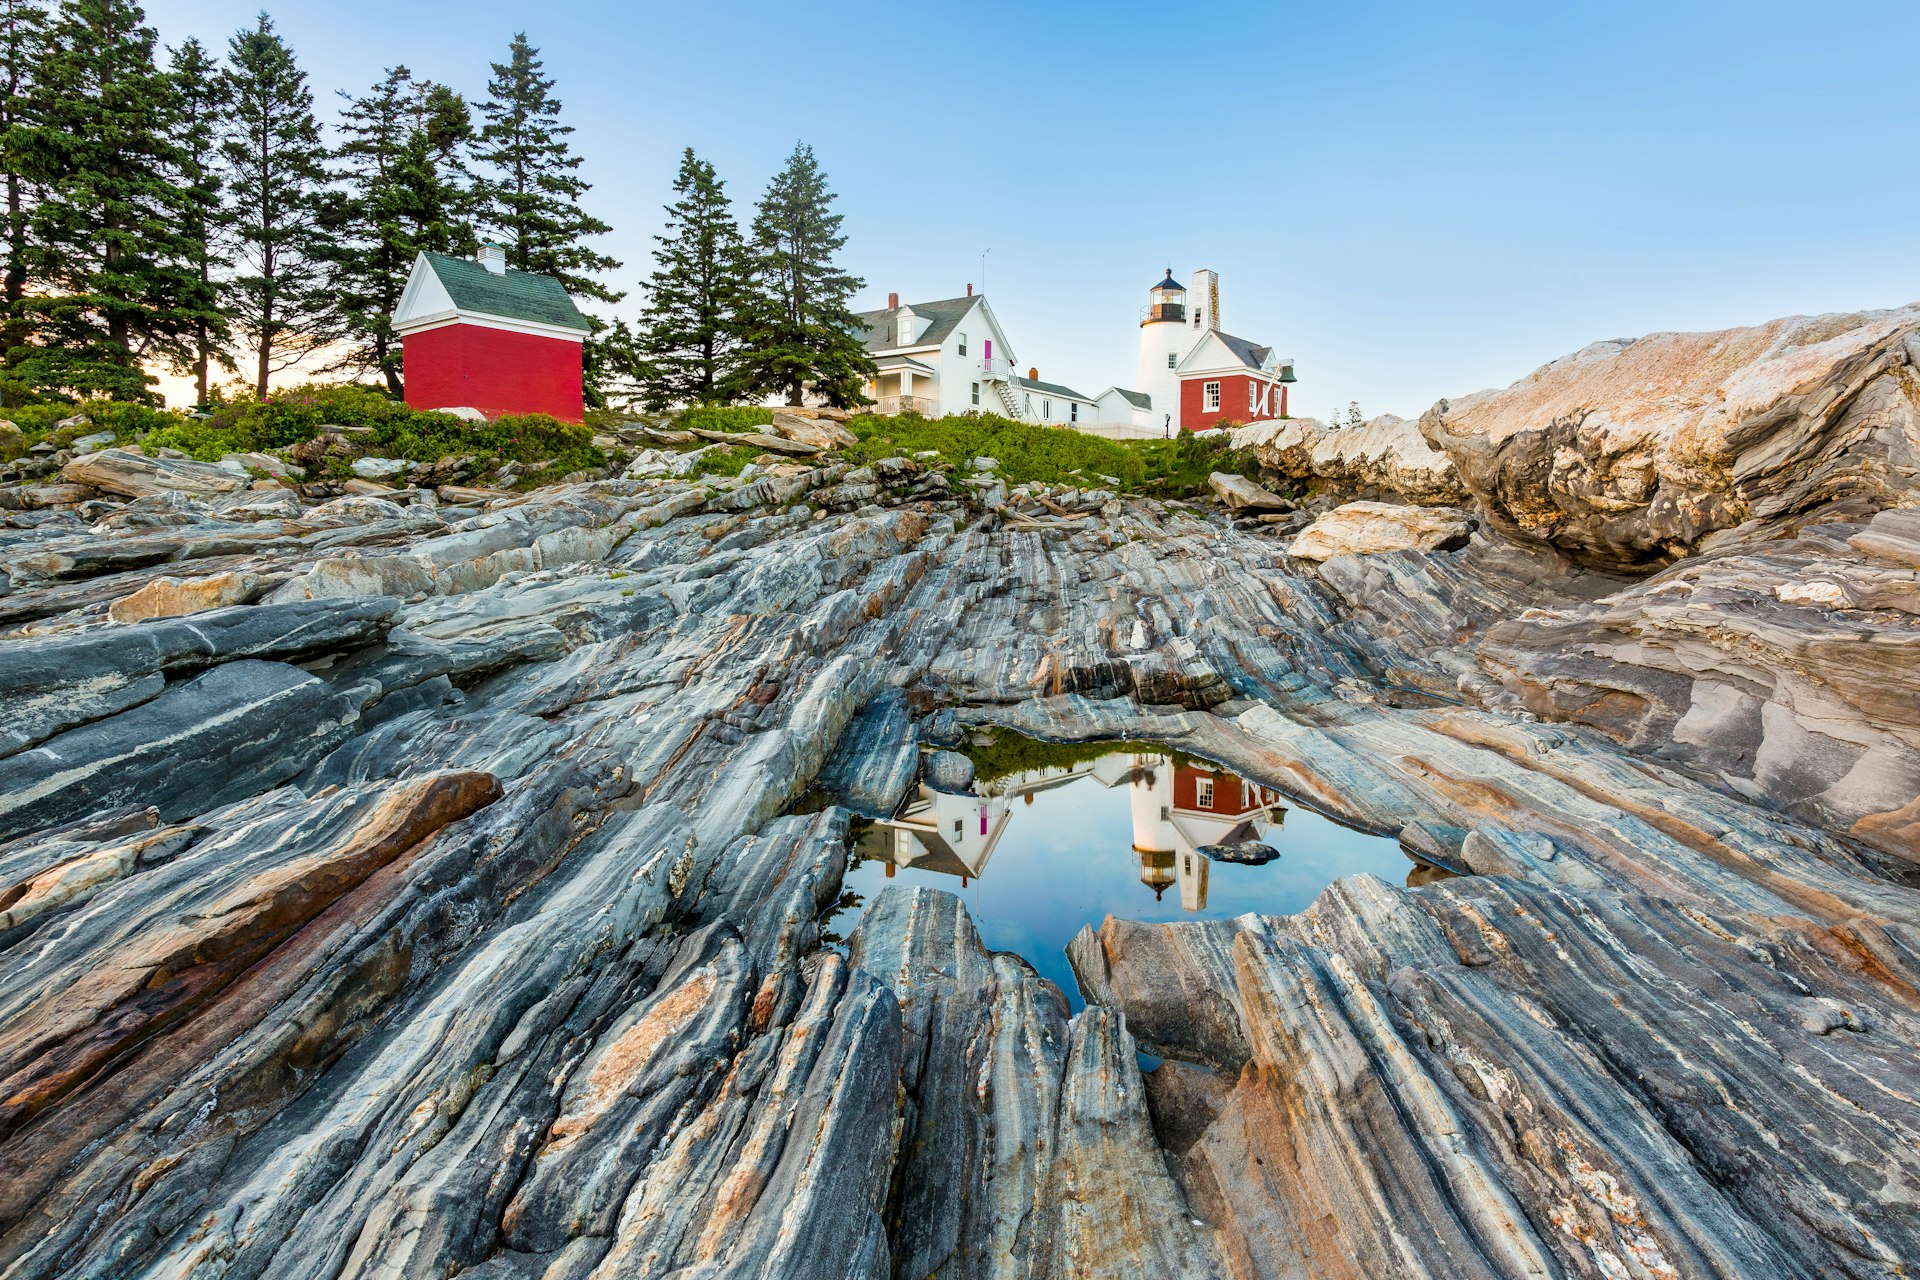 The characteristic "gneiss" rocks along the coast of the Pemaquid Peninsula allows for water to form in recesses. The lighthouse is reflected on this water surface. The Pemaquid Point Light is a historic U.S. lighthouse located in Bristol, Lincoln County, Maine, at the tip of the Pemaquid Neck